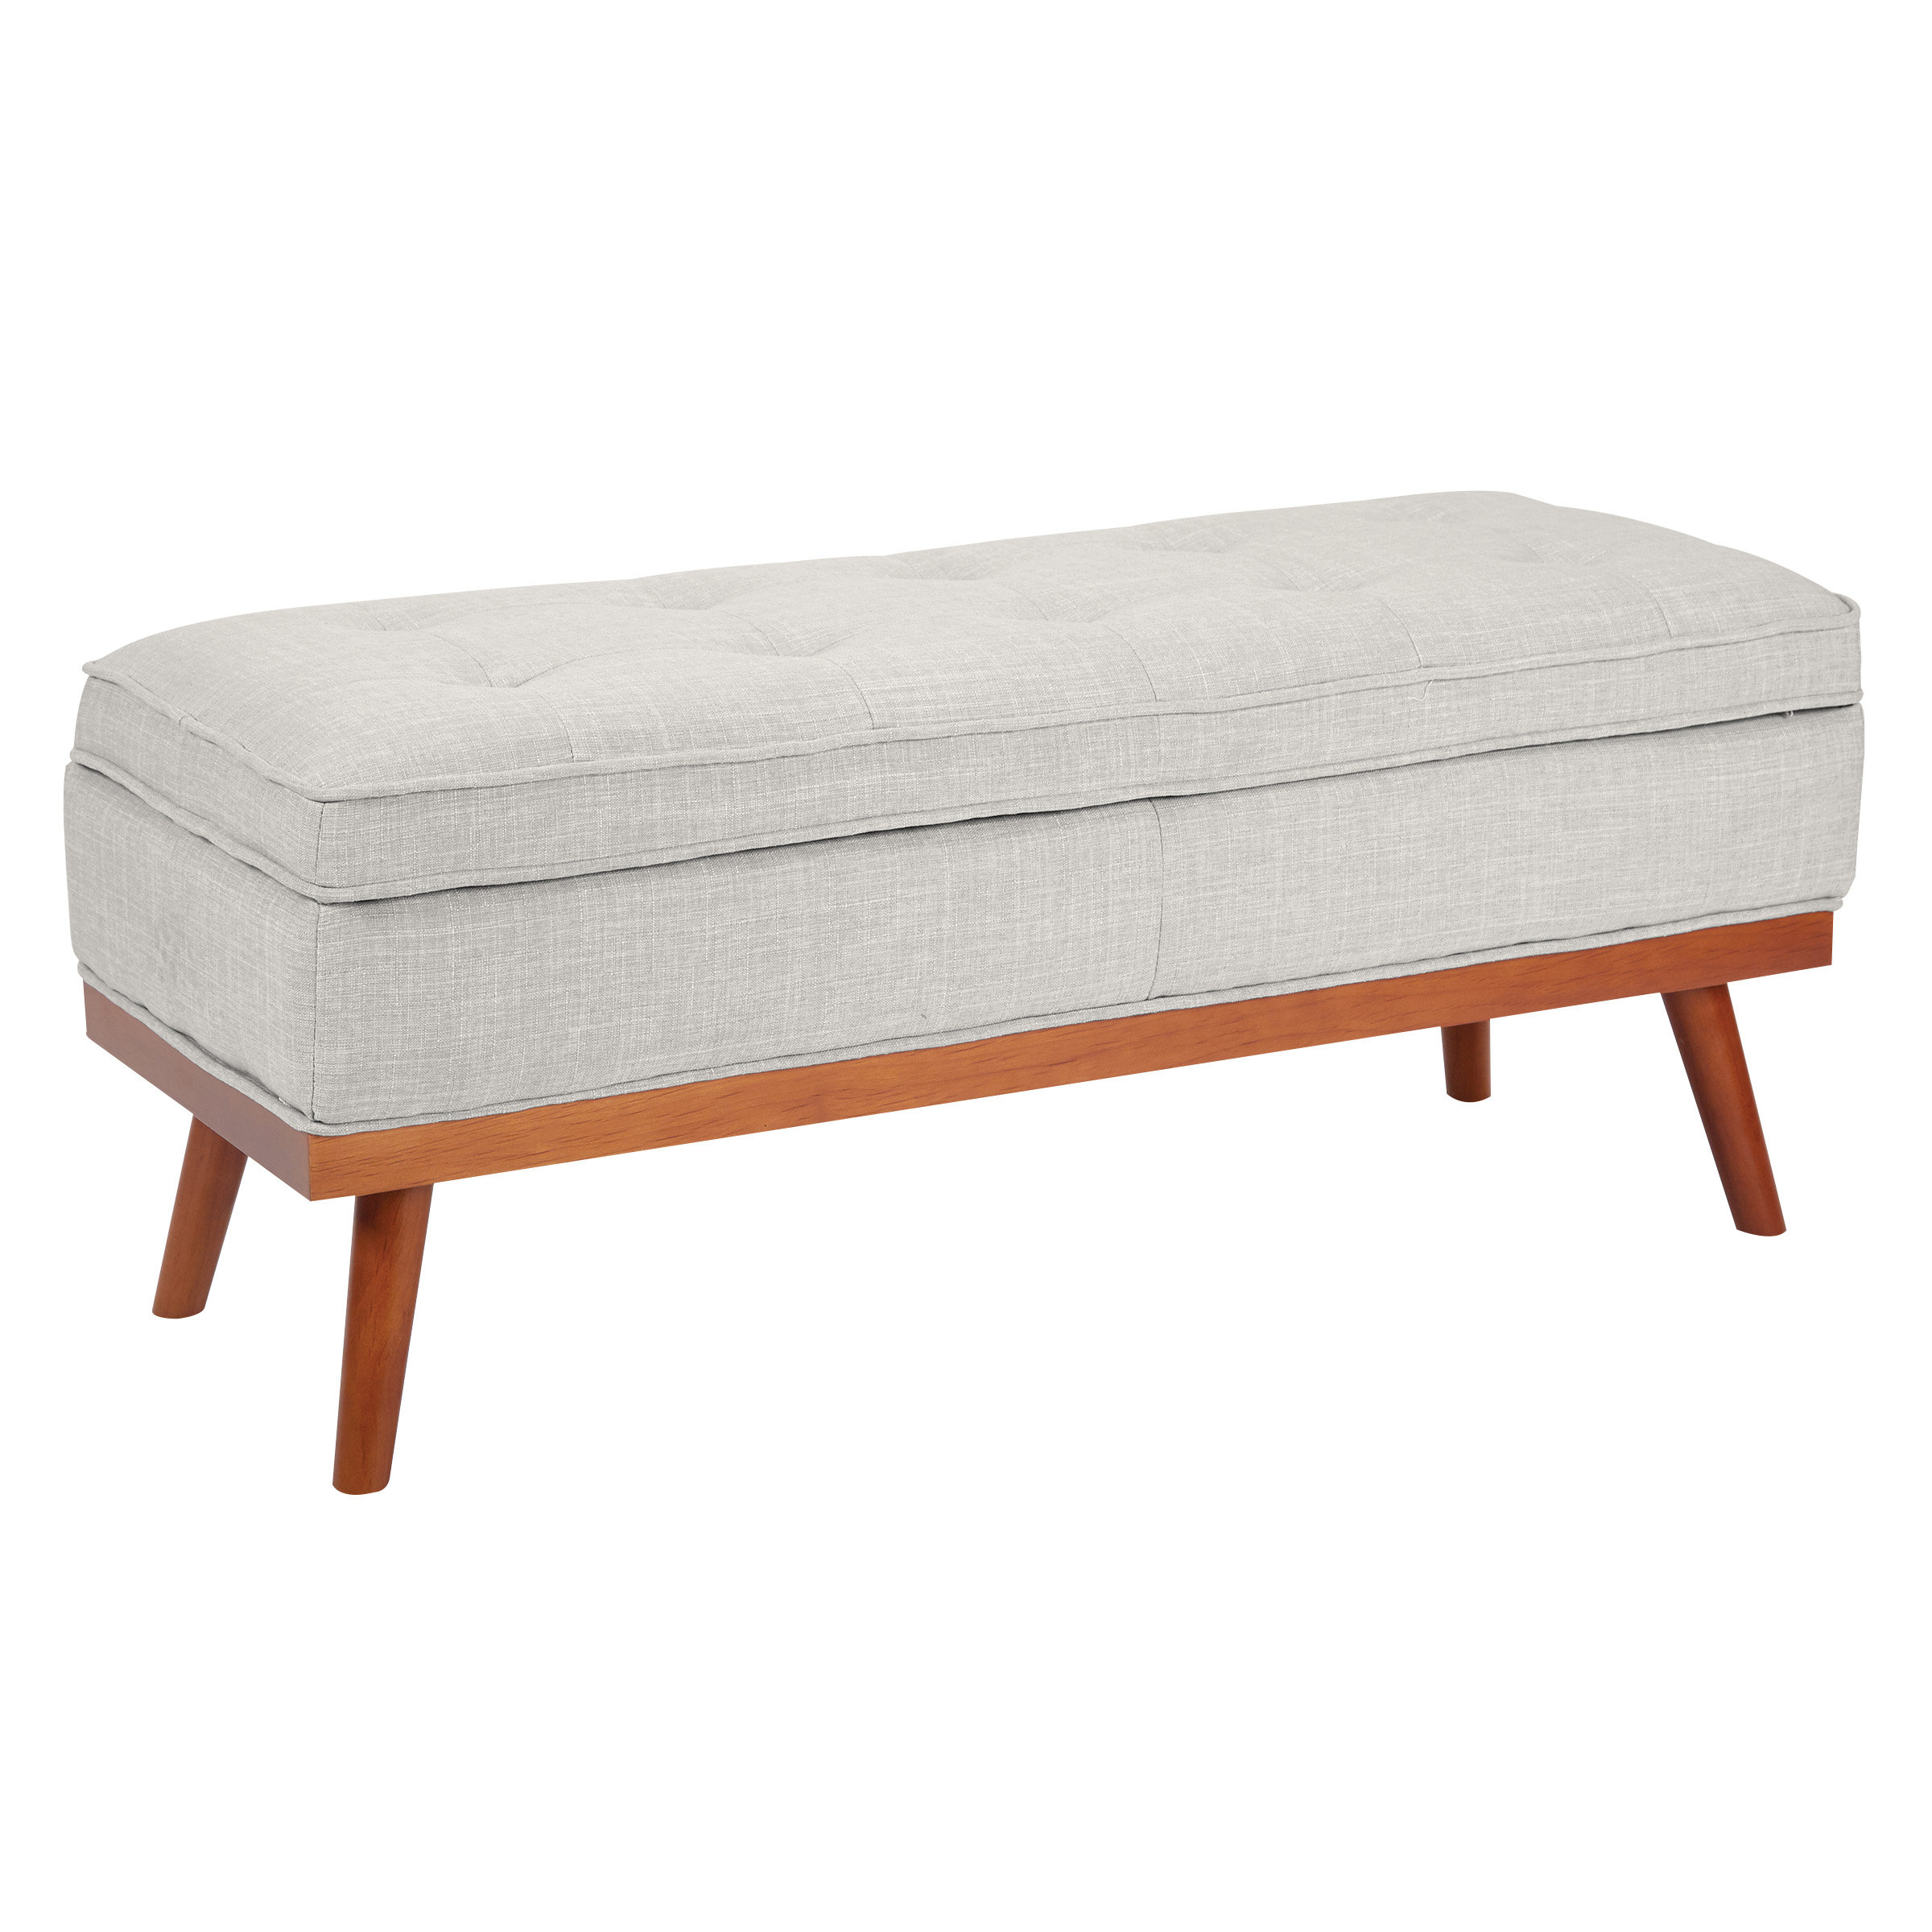 Small Tufted Benches Youll Love In 2021 Wayfair